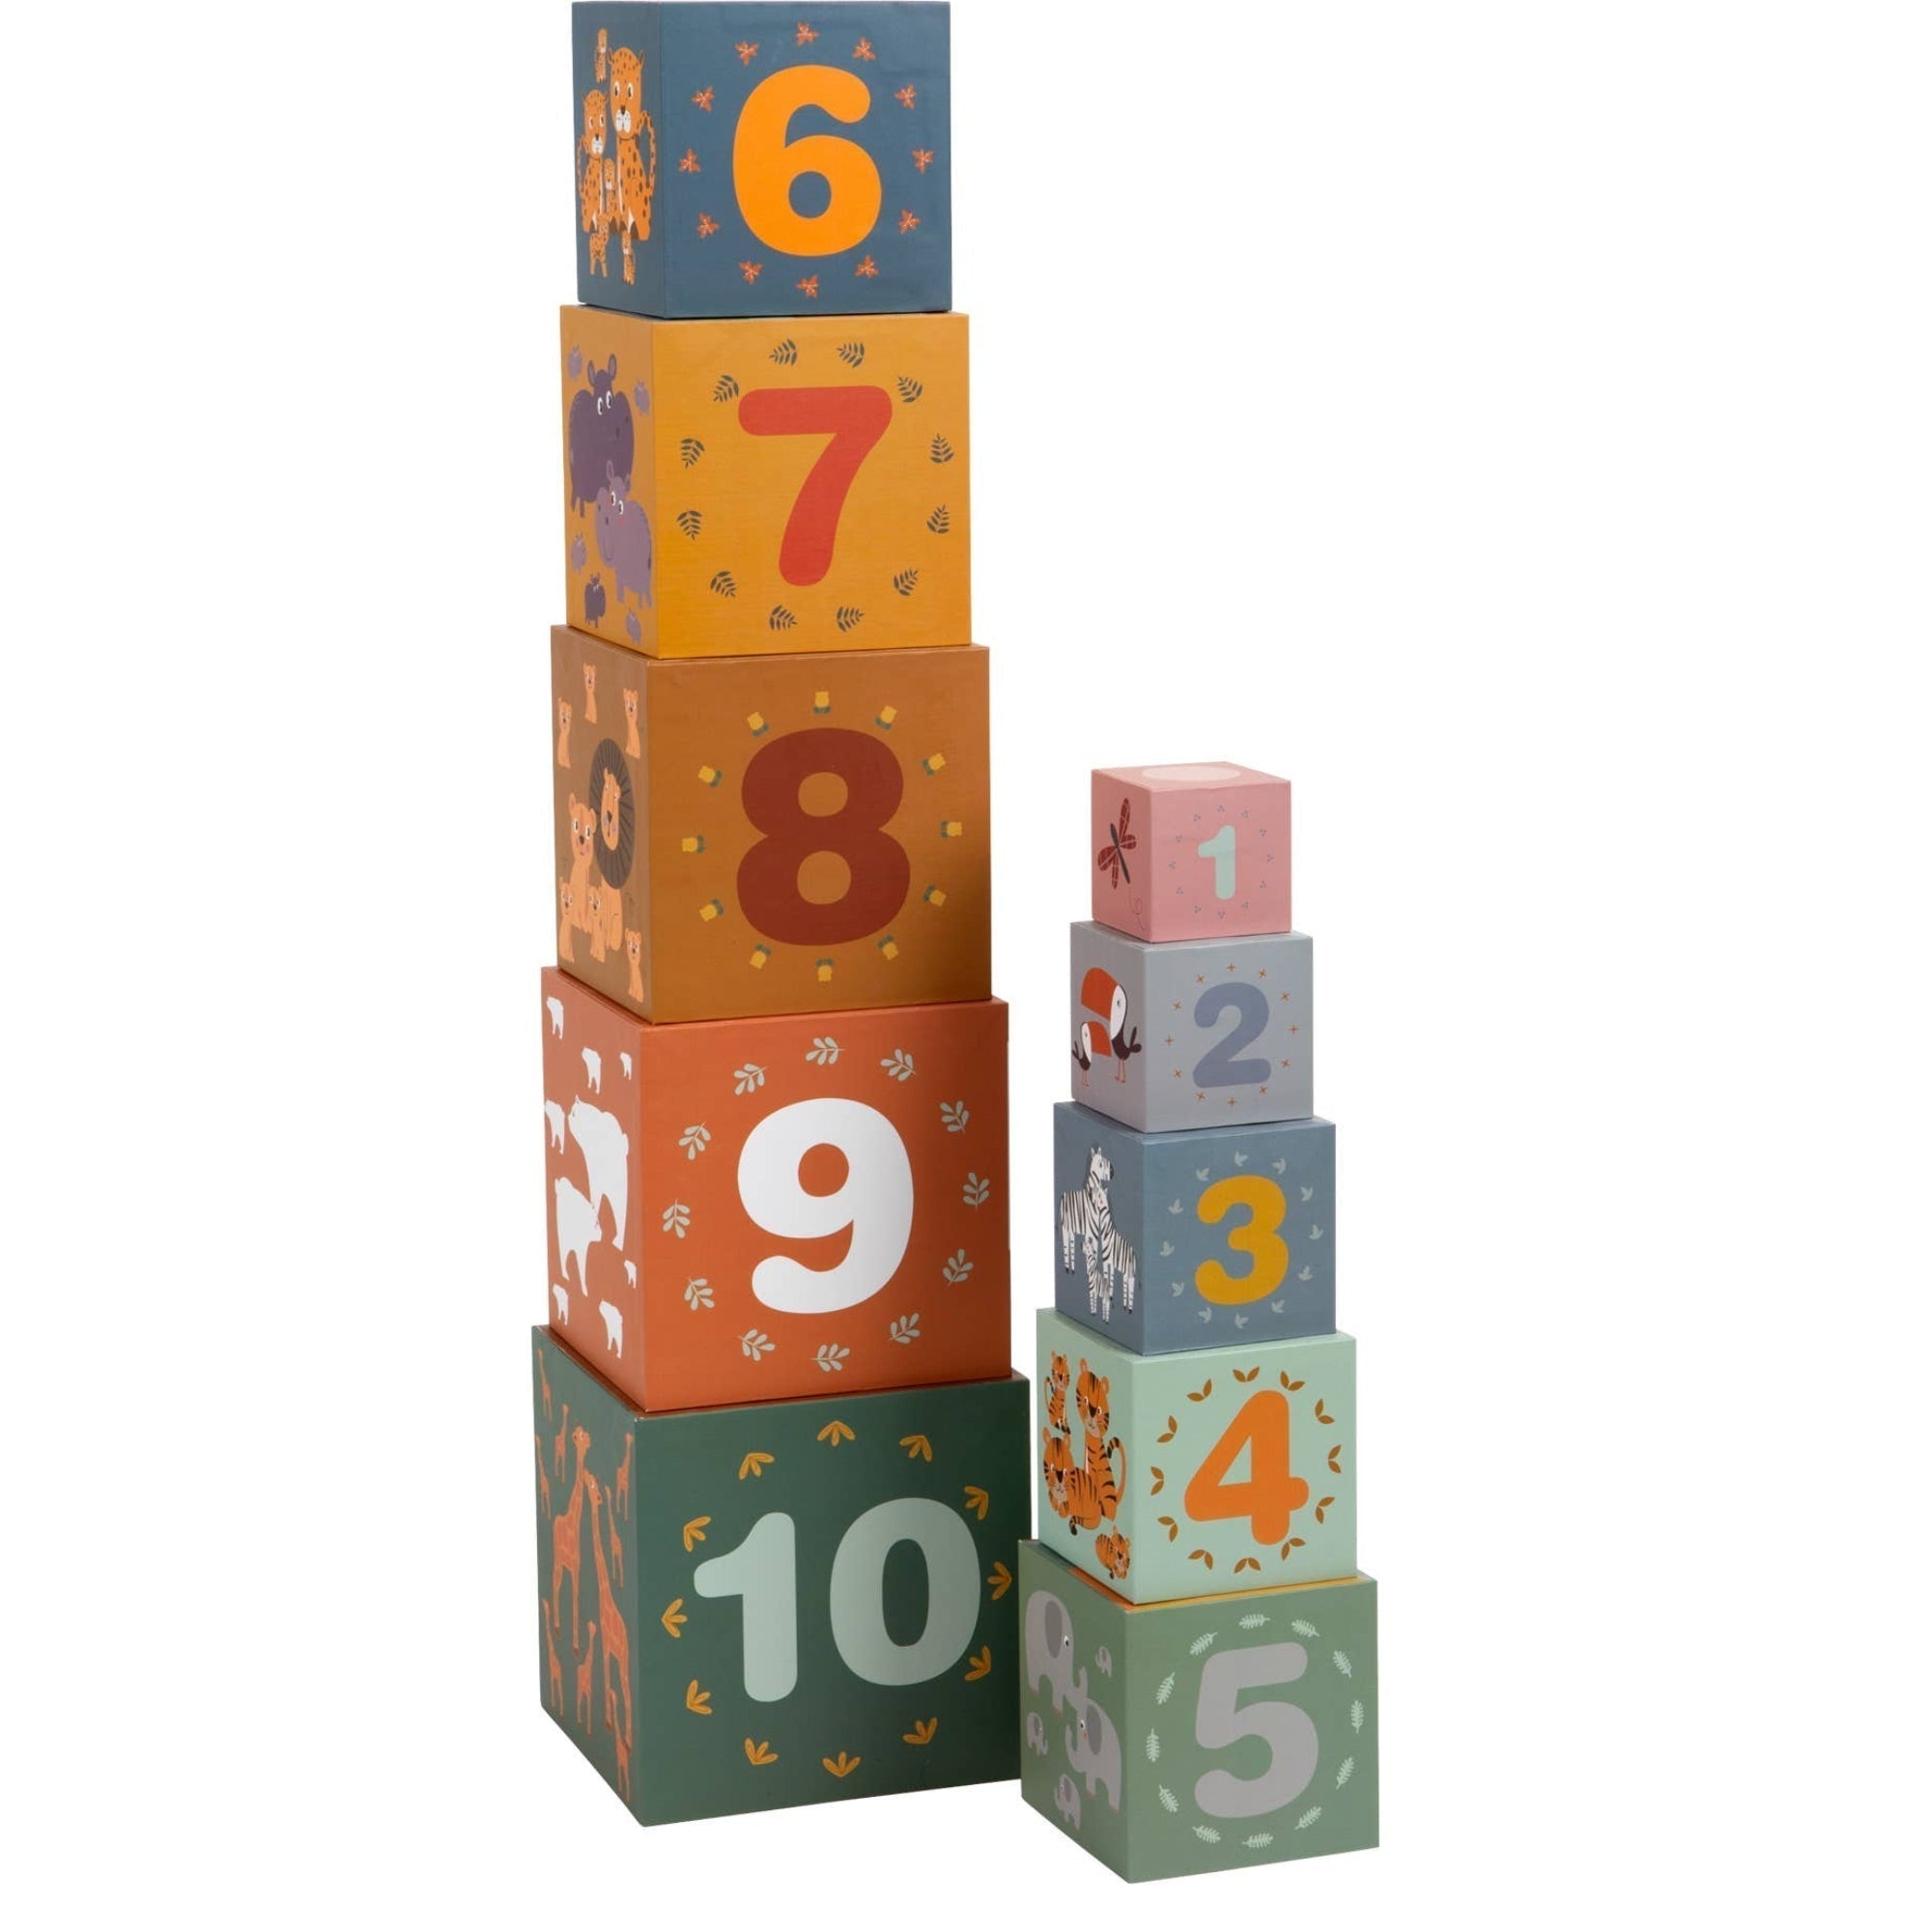 Stacking Cubes Safari, Graduating in size, these delightful Stacking Cubes Safari need to be stacked in the correct order, from largest to smallest, to create a tower. Each Stacking Cubes Safari features a detailed scene with numbers and animals. As little ones stack each Stacking Cubes Safari, they can discuss the animal on one side, developing their language skills and vocabulary. Perfect for early learning, these cubes are a versatile learning aid. Stacking Cubes Safari Once playtime is over, the stackin